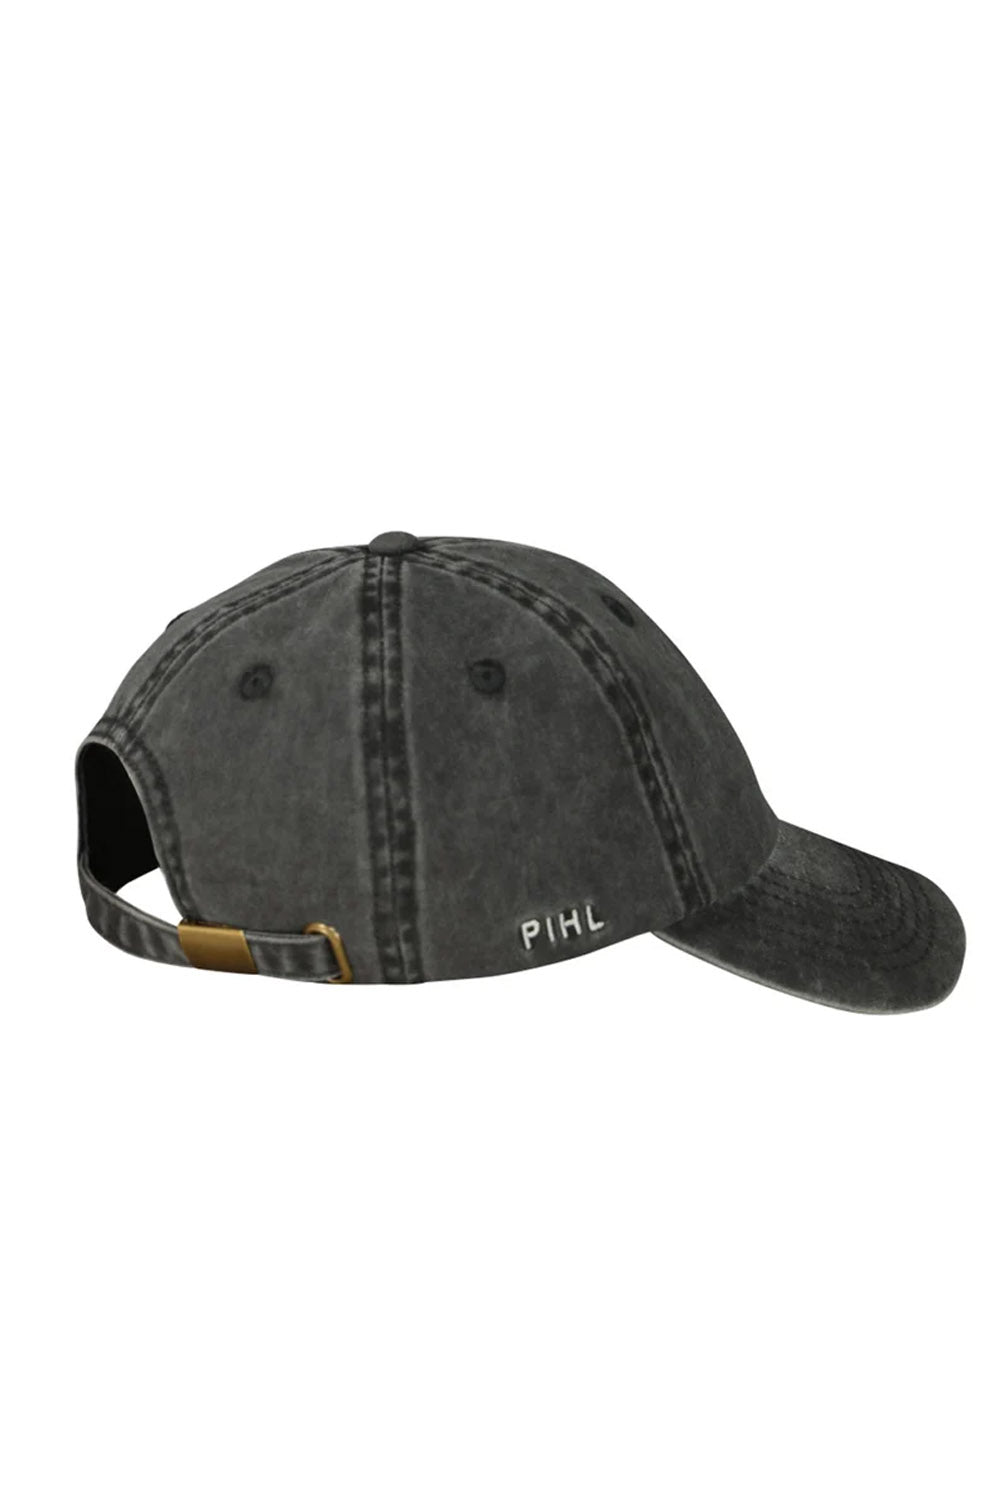 Lily cap Washed black